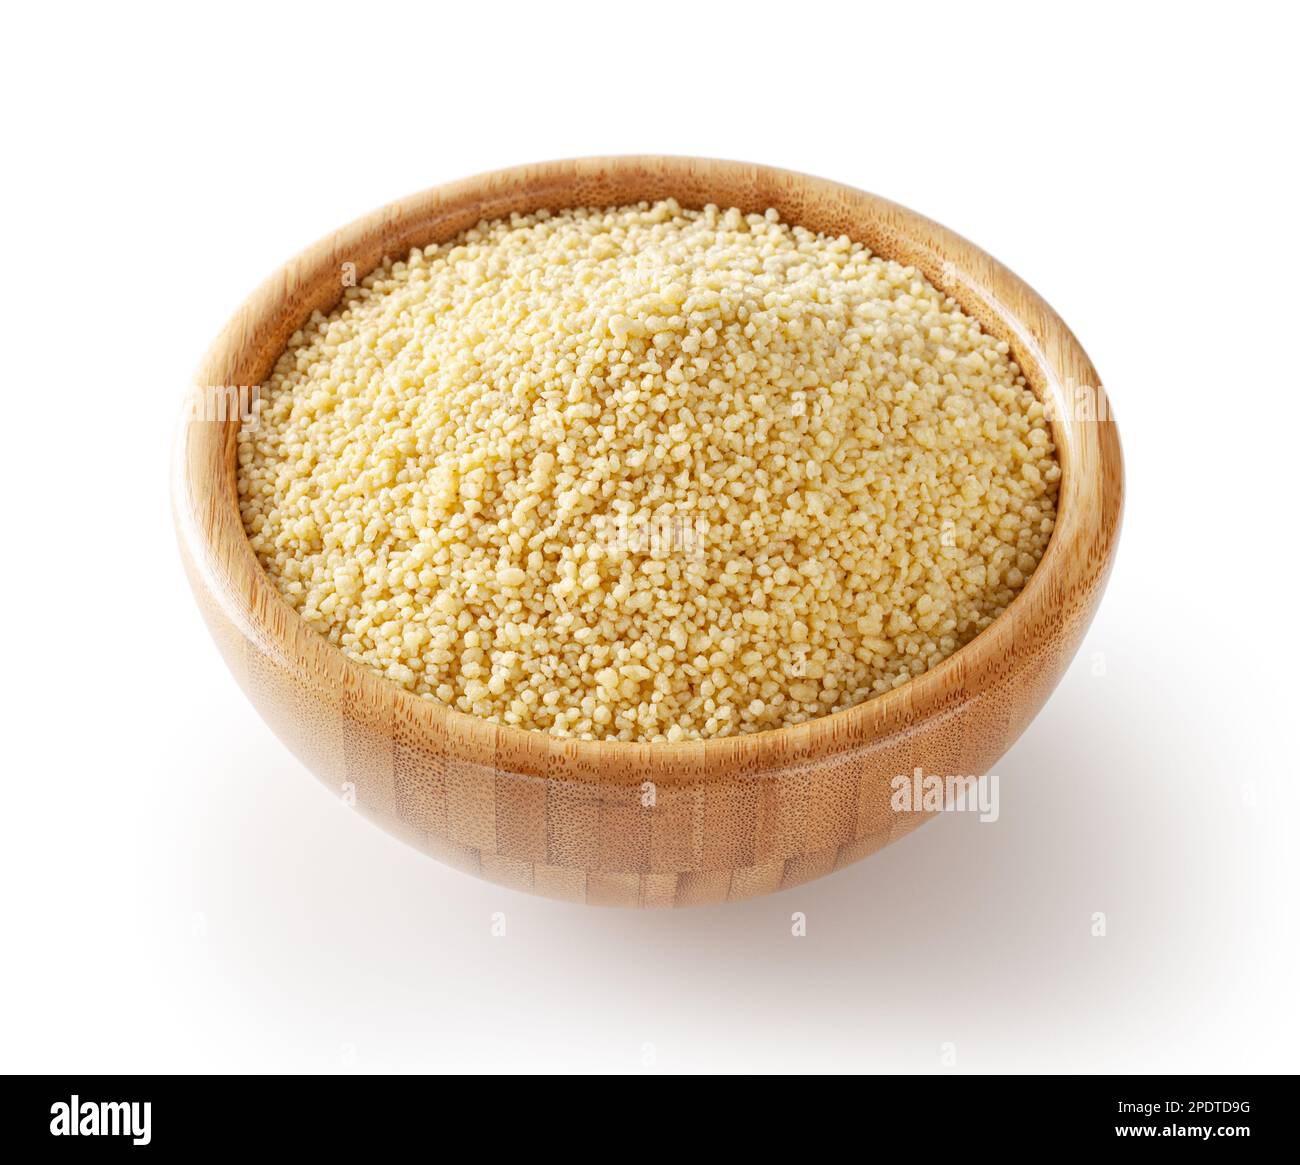 Uncooked dried cous cous in wooden bowl isolated on white background with clipping path Stock Photo